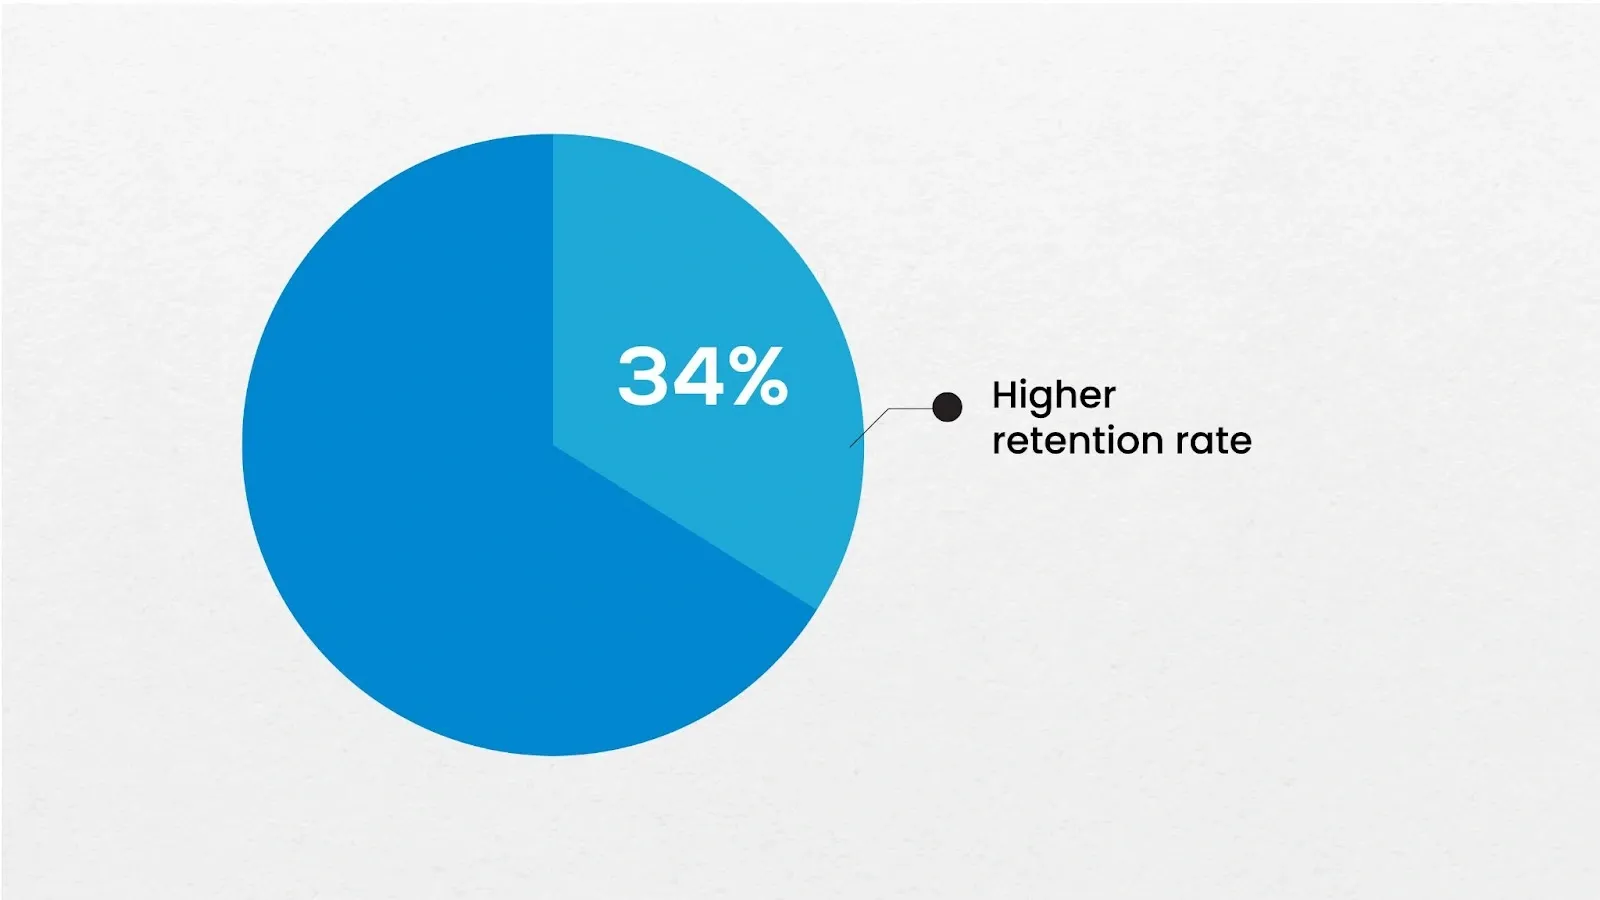 pie chart showing 34% higher retention rate